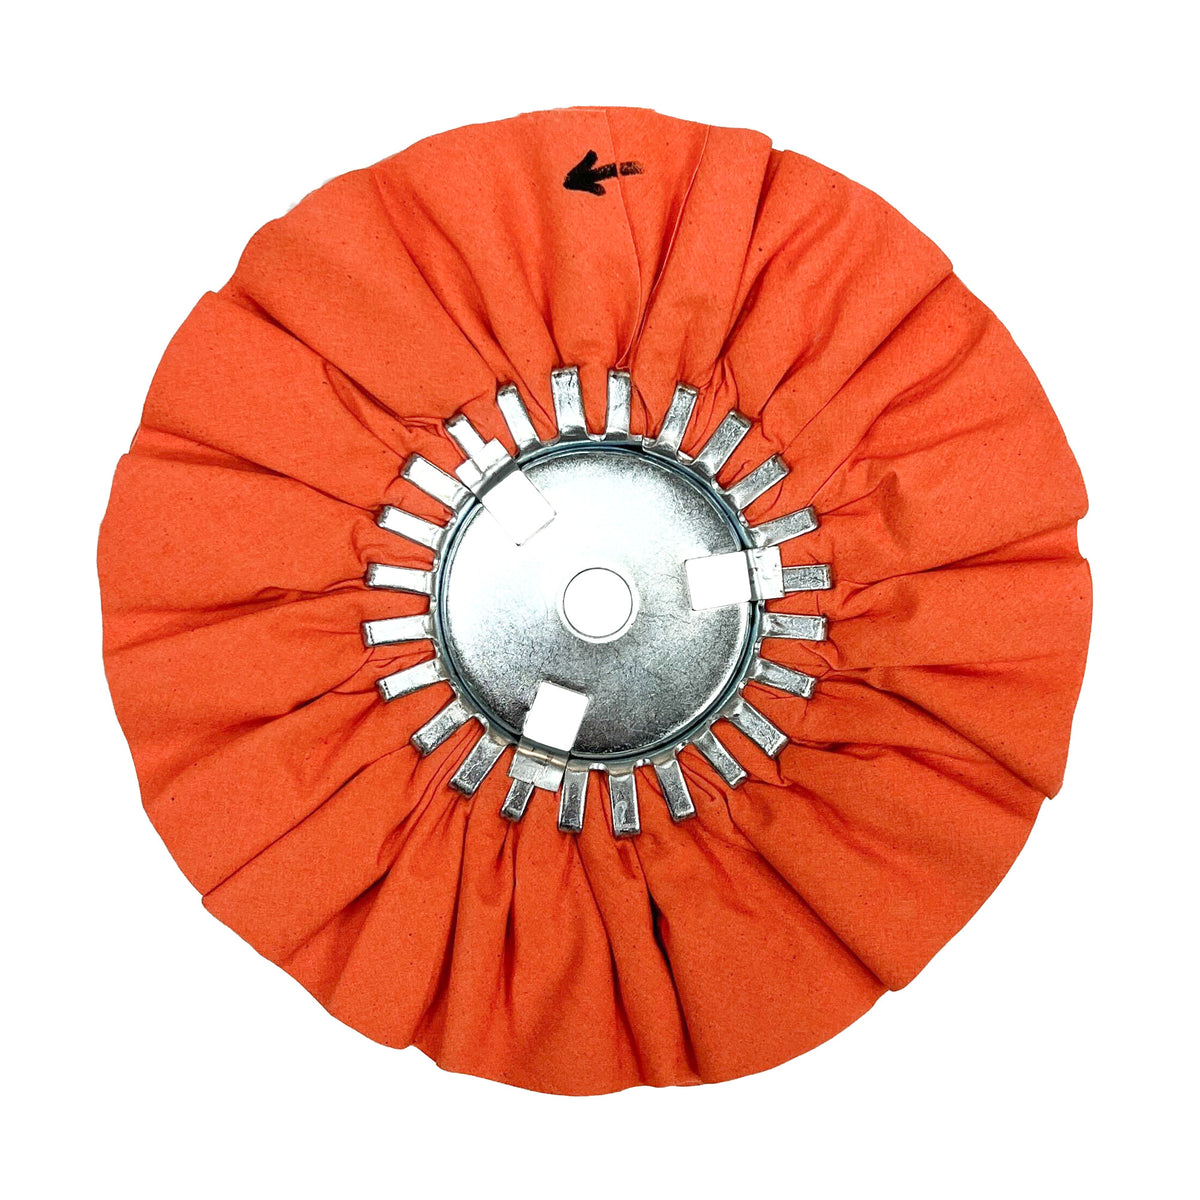 Renegade Products USA Orange Airway Buffing Wheel with Center Plate - High-Quality Buffing Tool for Efficient Polishing and Finishing